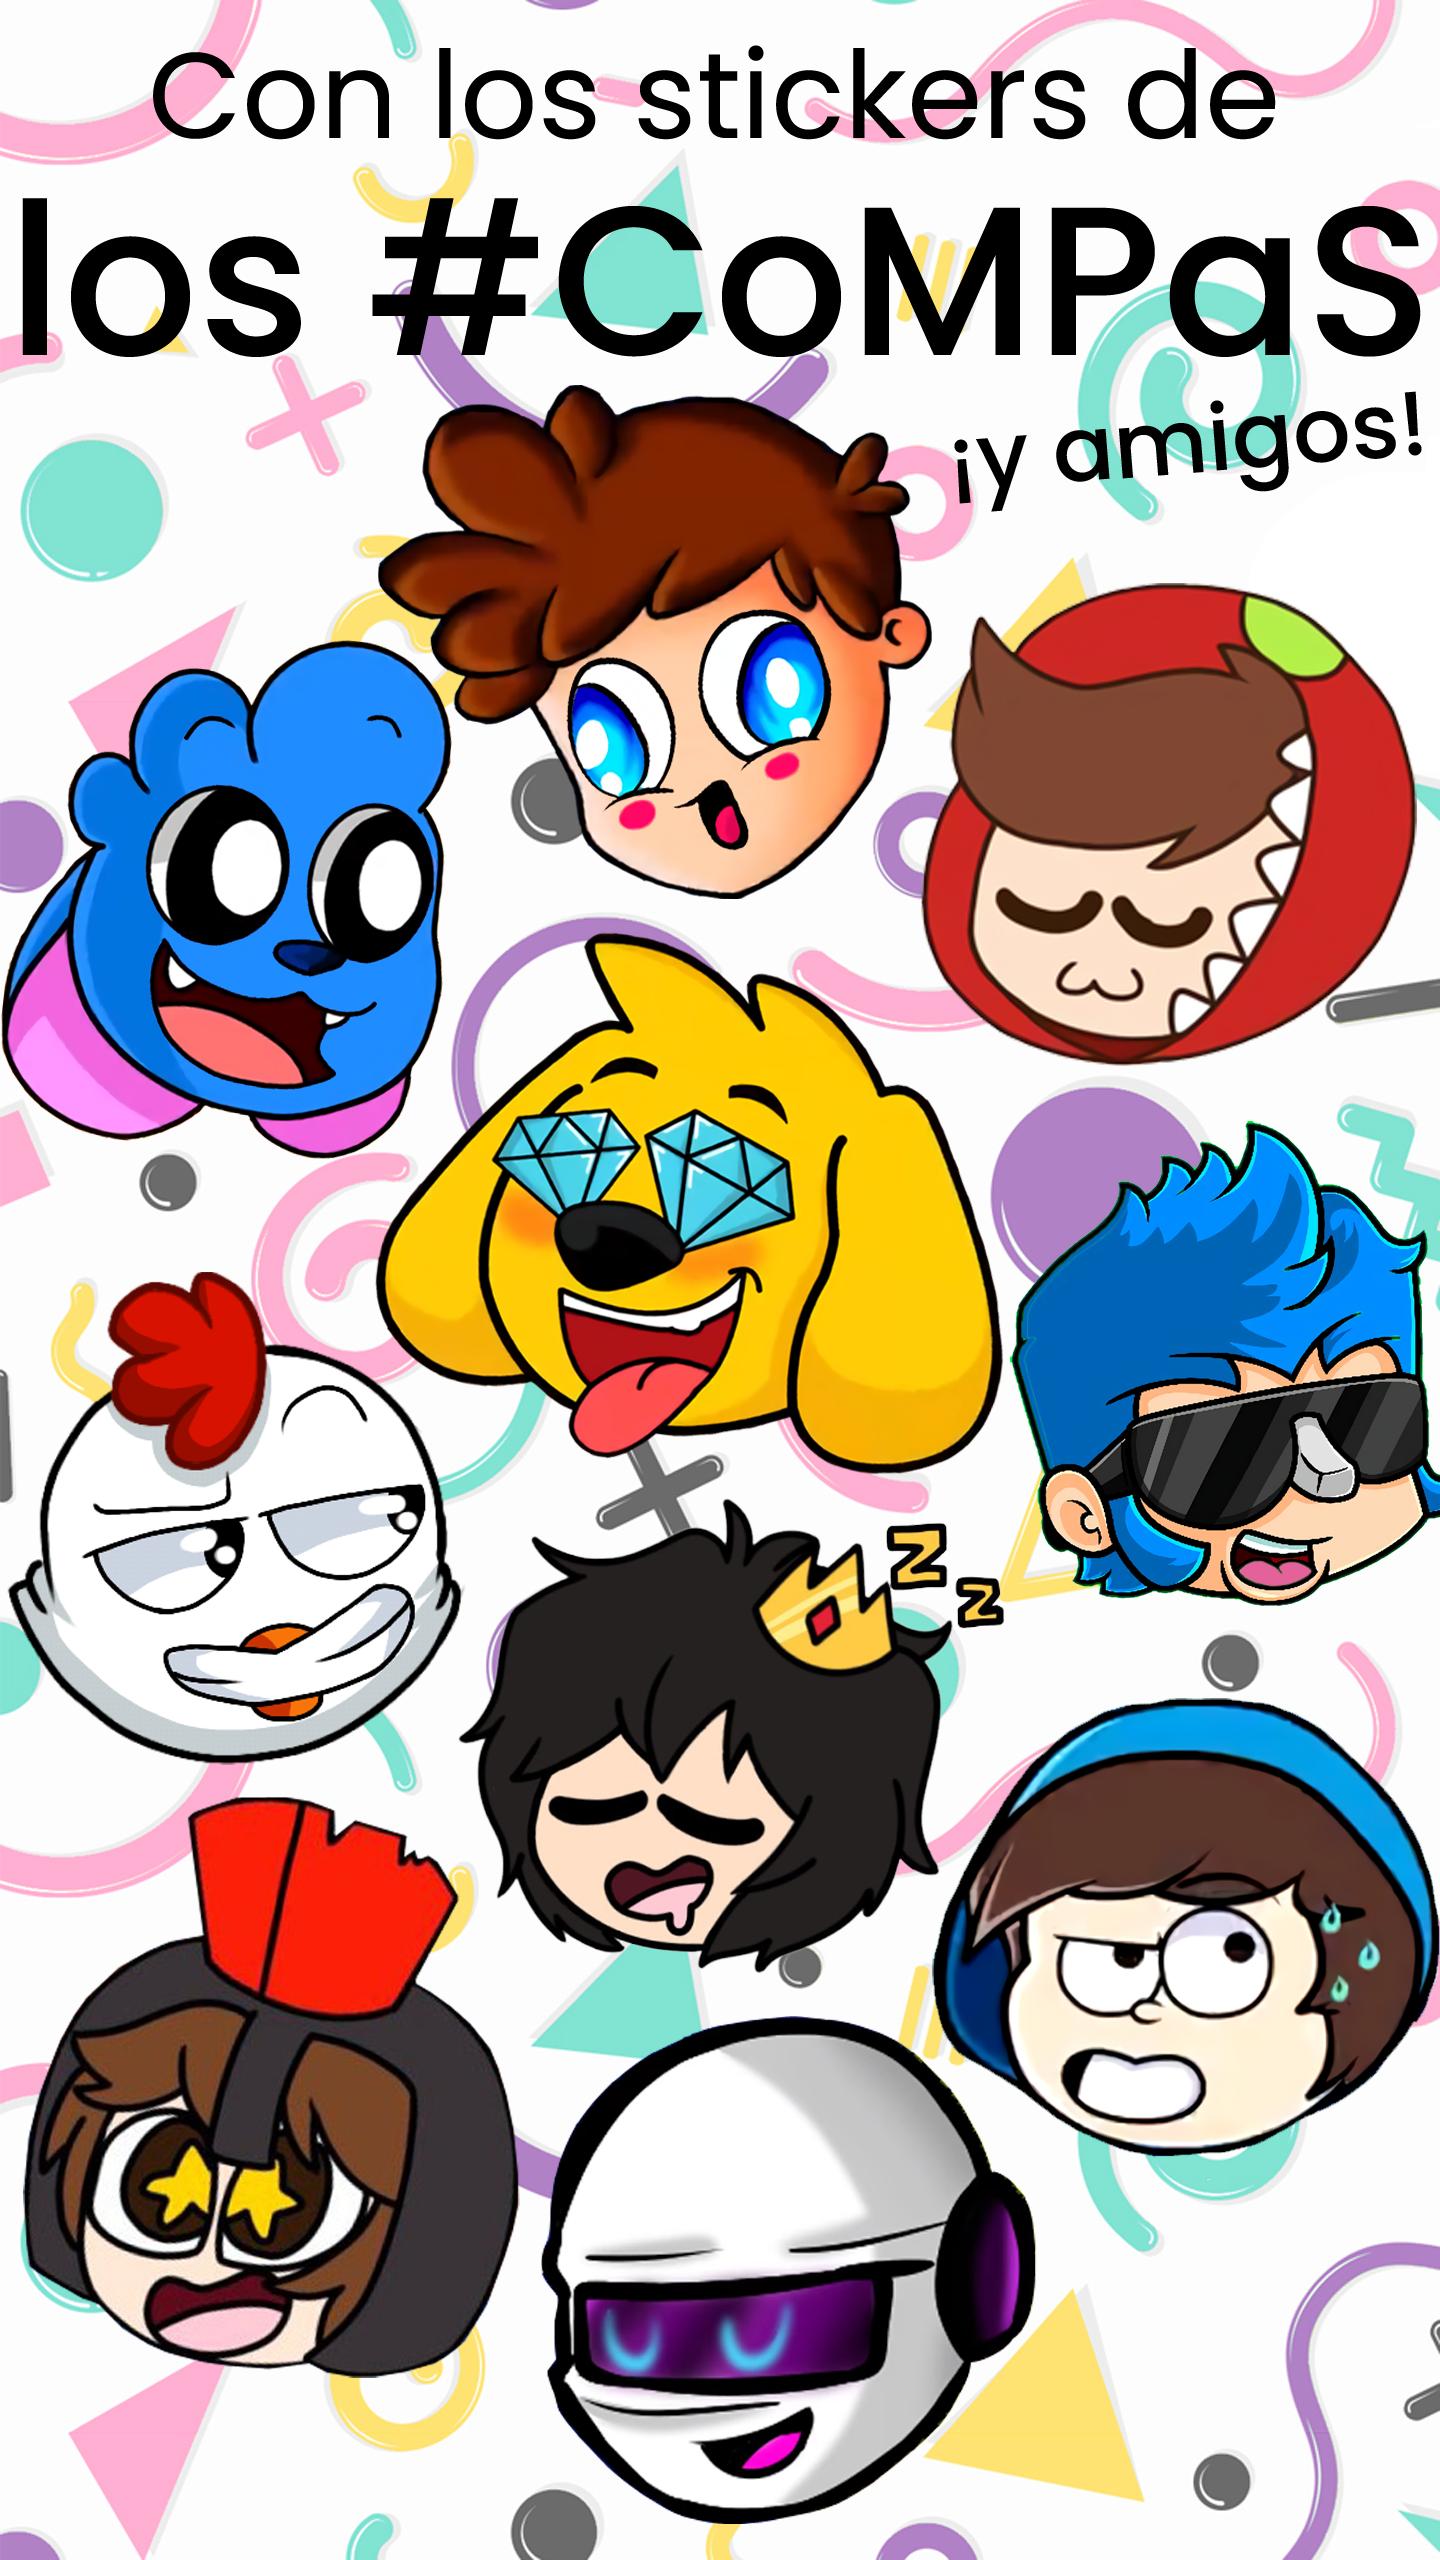 Stickerstube Stickers De Youtubers For Android Apk Download - kawaii dibujo de rodny roblox